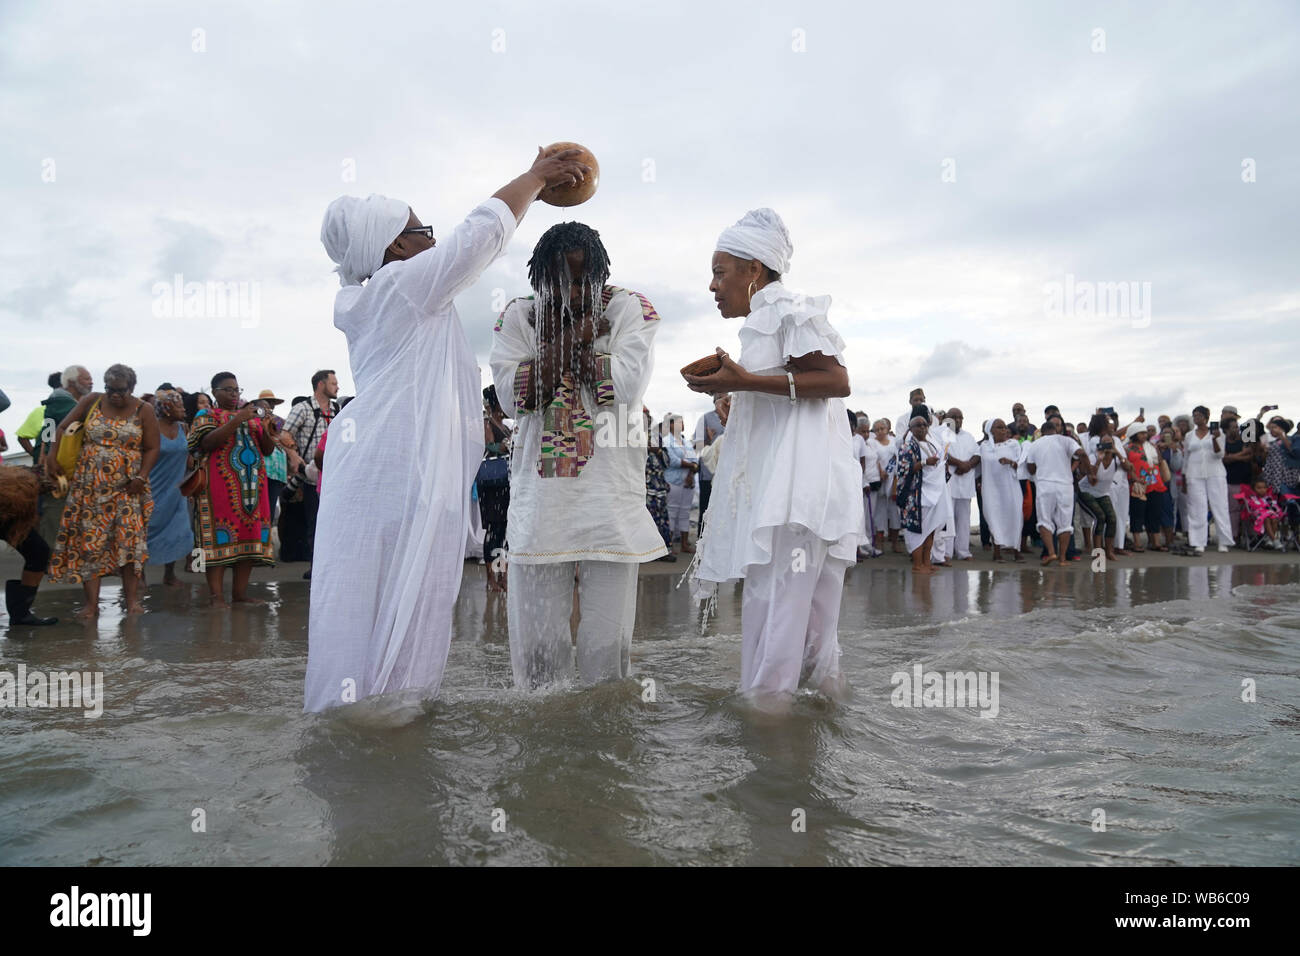 Hampton, USA. 24th Aug, 2019. People attend a cleansing ceremony at Buckroe Beach in Hampton, Virginia, on Aug. 24, 2019. Activities are held from Aug. 23 to 25 in commemoration of the 400th anniversary of the first African landing which occurred at Old Point Comfort in Virginia in 1619. Credit: Liu Jie/Xinhua/Alamy Live News Stock Photo